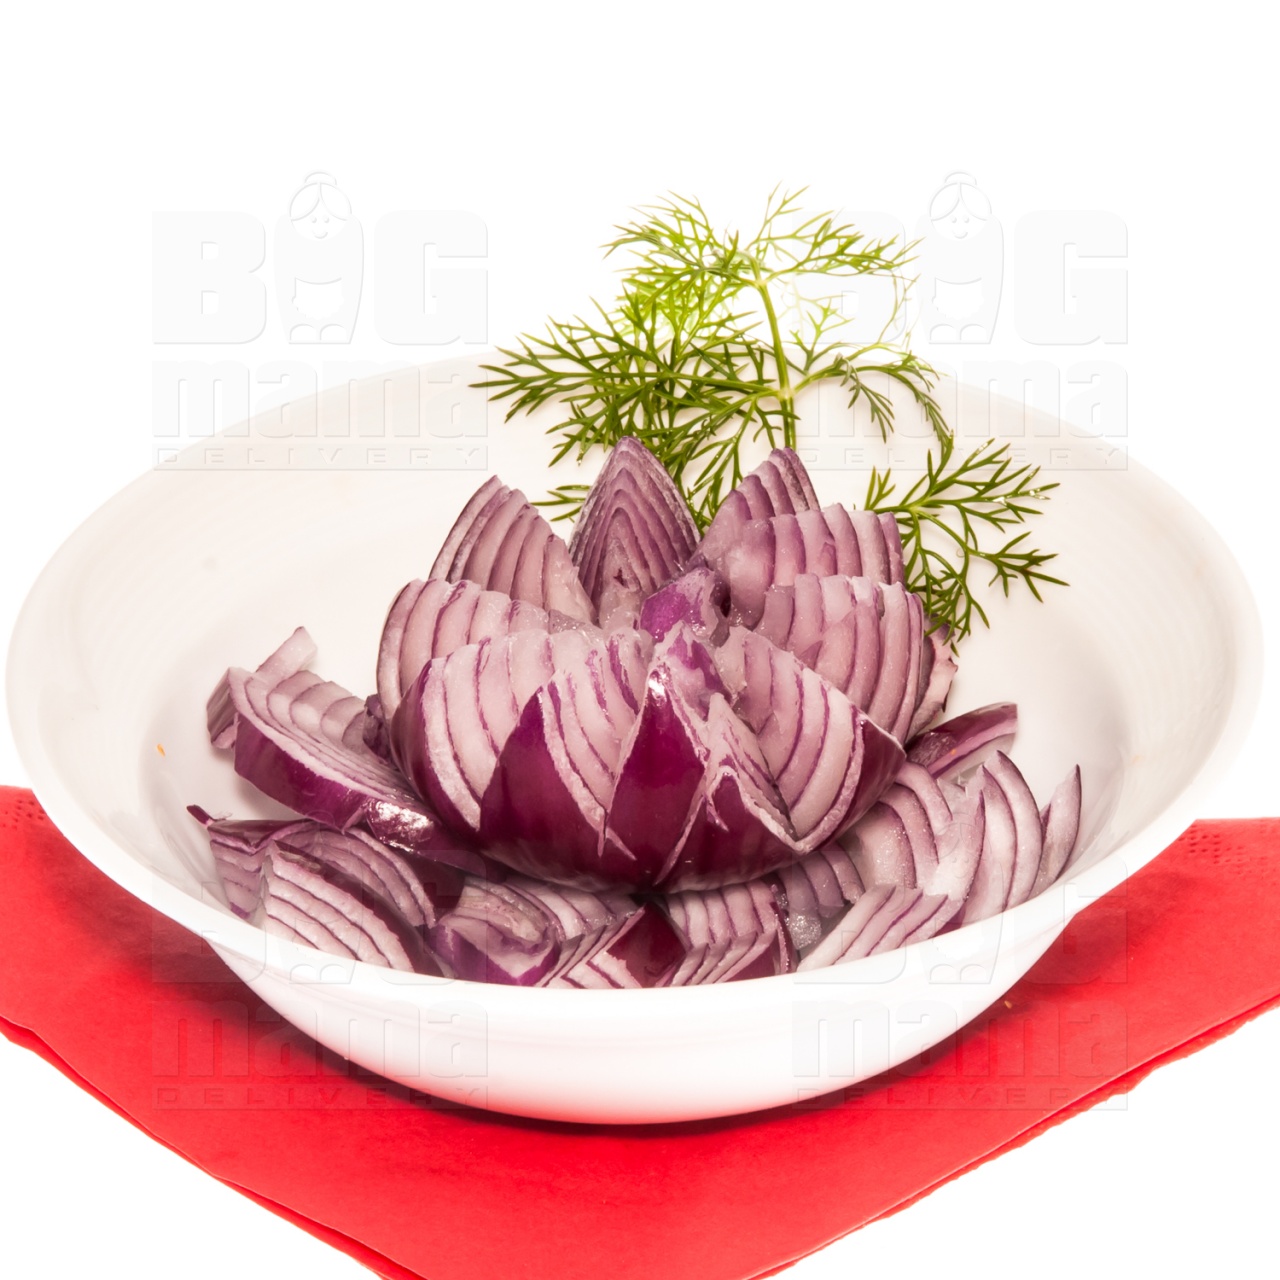 Product #152 image - Red onion